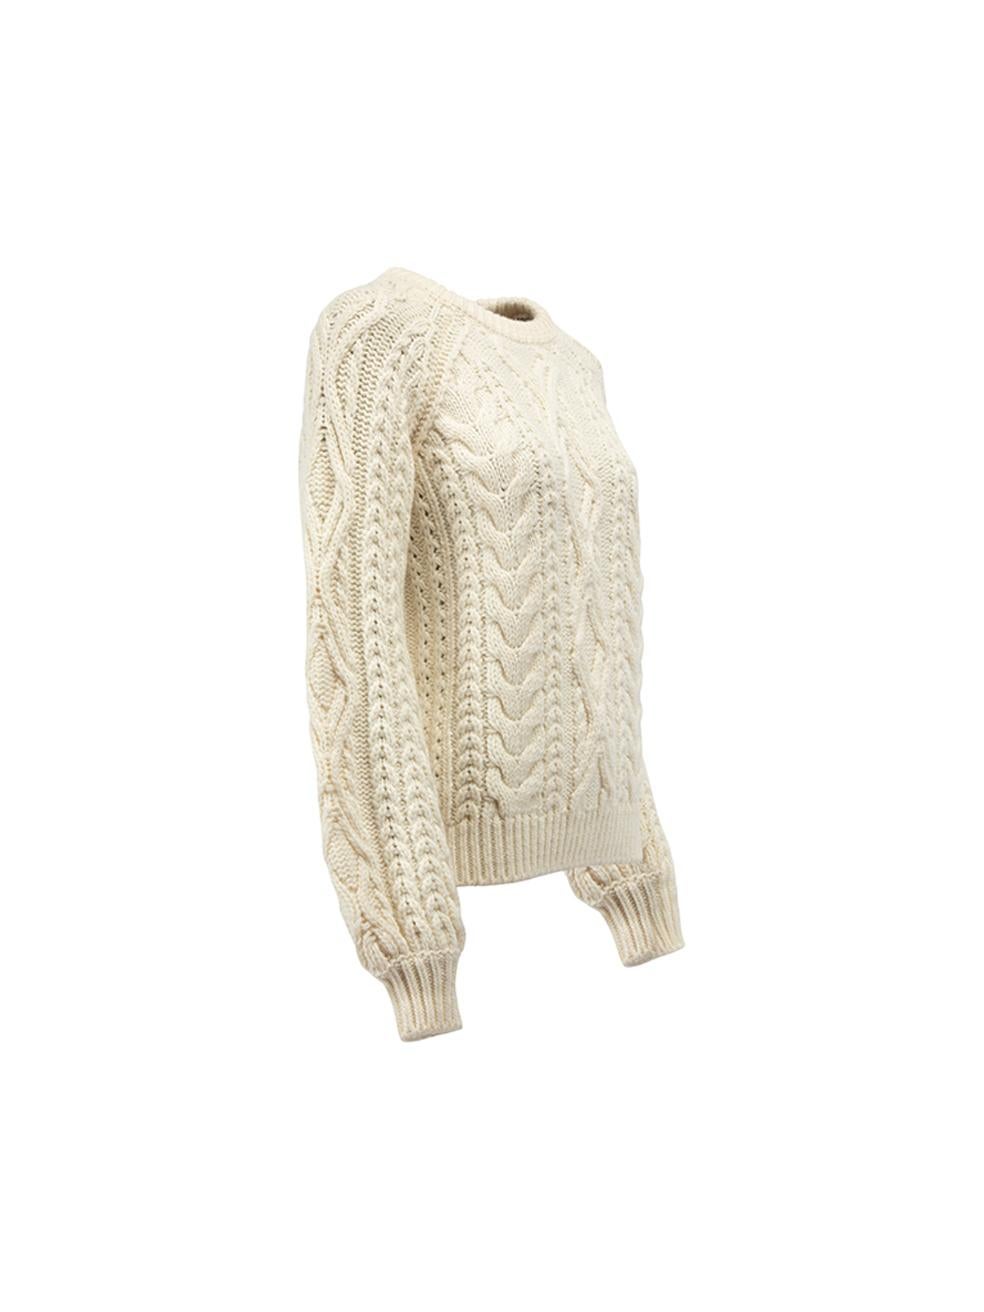 CONDITION is Never worn, with tags. No visible wear to jumper is evident on this new Maje designer resale item. 
 
 Details
  Cream
 Wool
 Long sleeves jumper
 Cable knit
 Round neckline
 
 
 Made in Tunisia
 
 Composition
 52% Acrylic and 48% Wool
